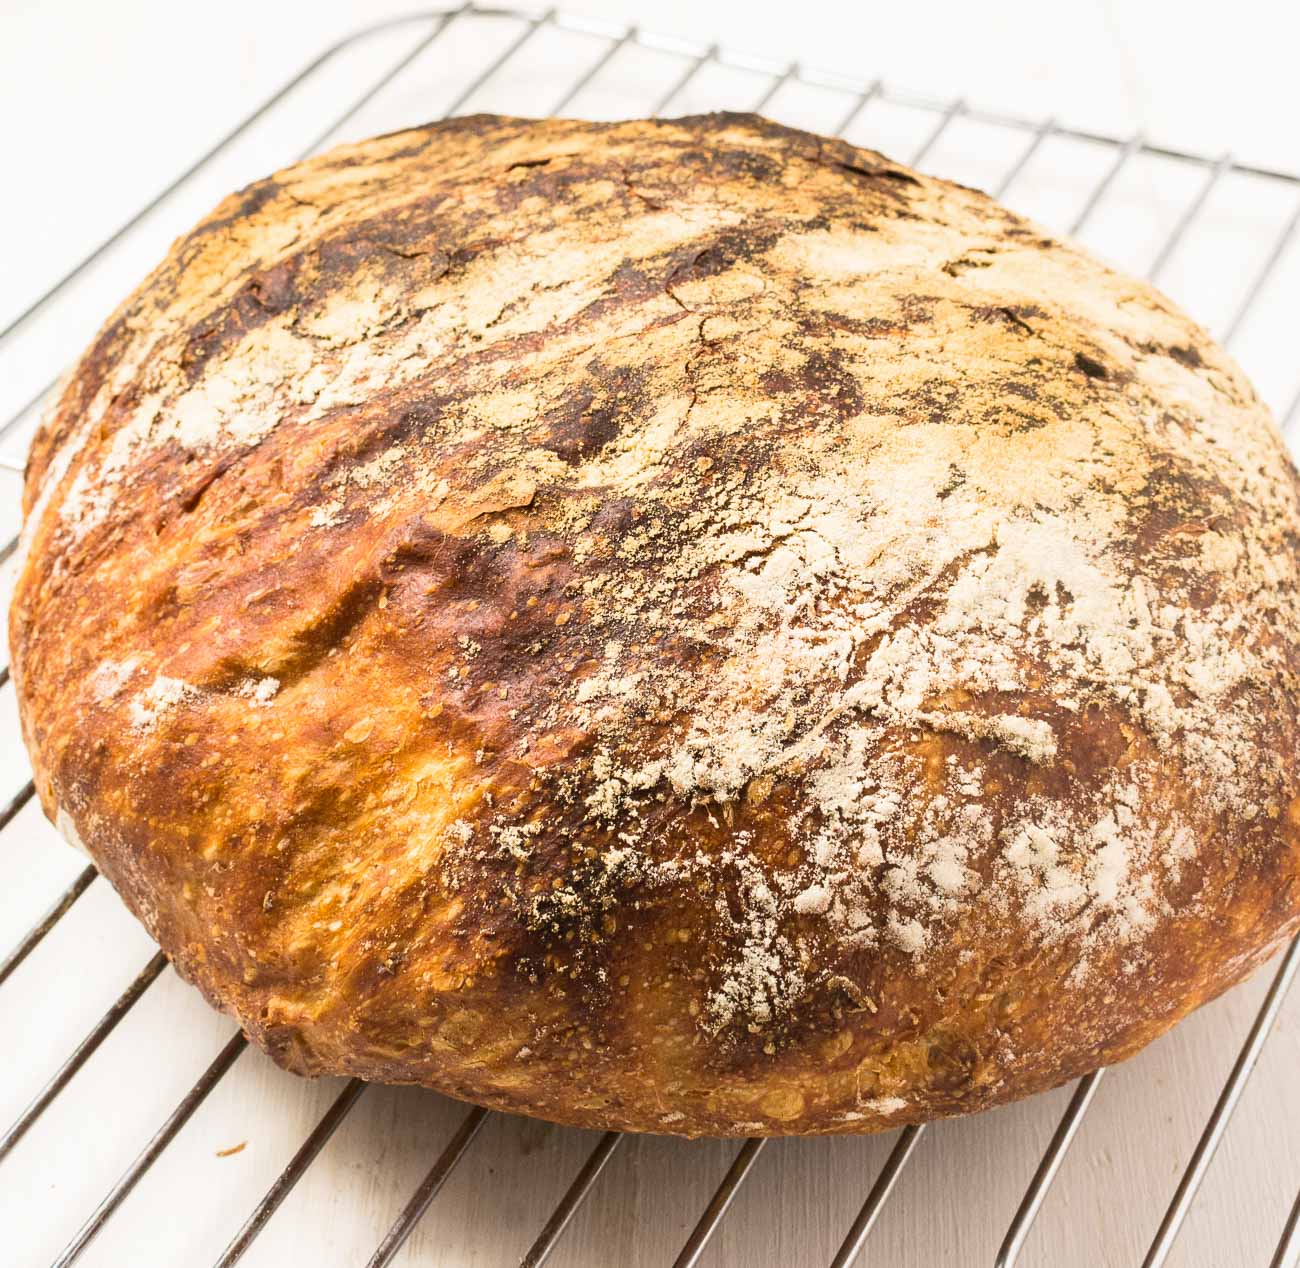 Dutch oven no-knead bread is a great way to get into making bread at home.